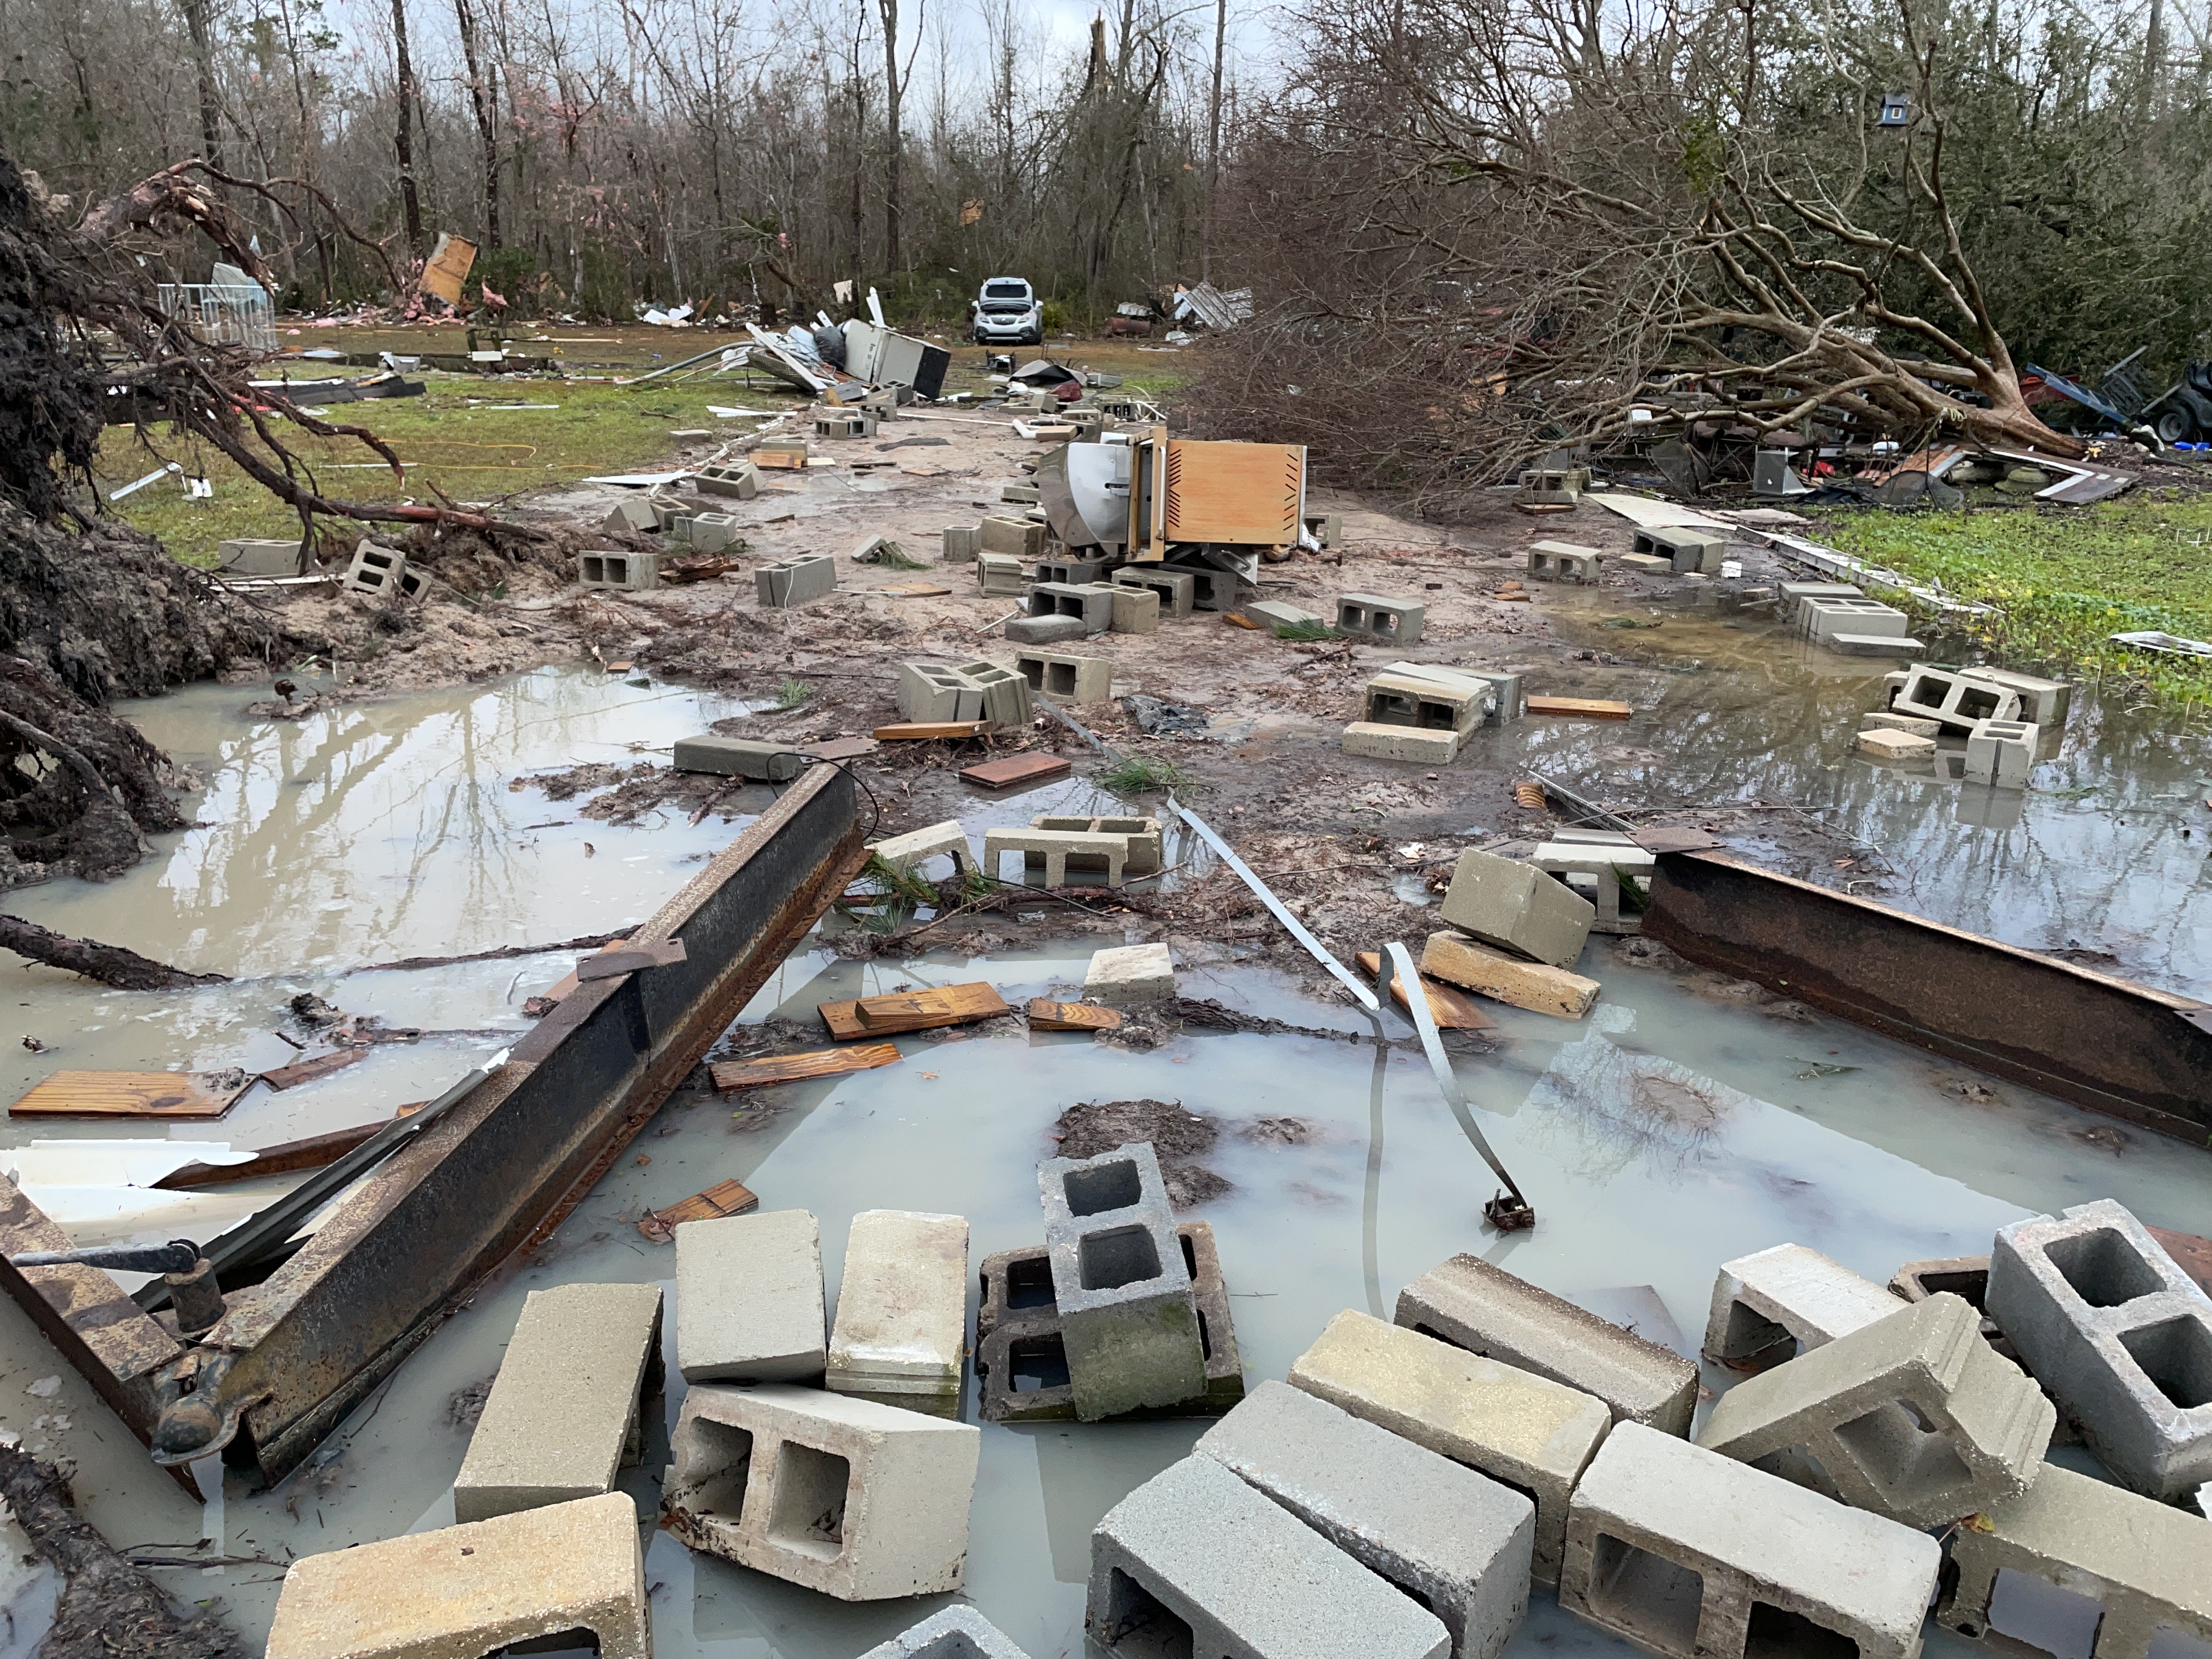 A mobile home that was destroyed at EF2 intensity on east side of Valdosta, Georgia.